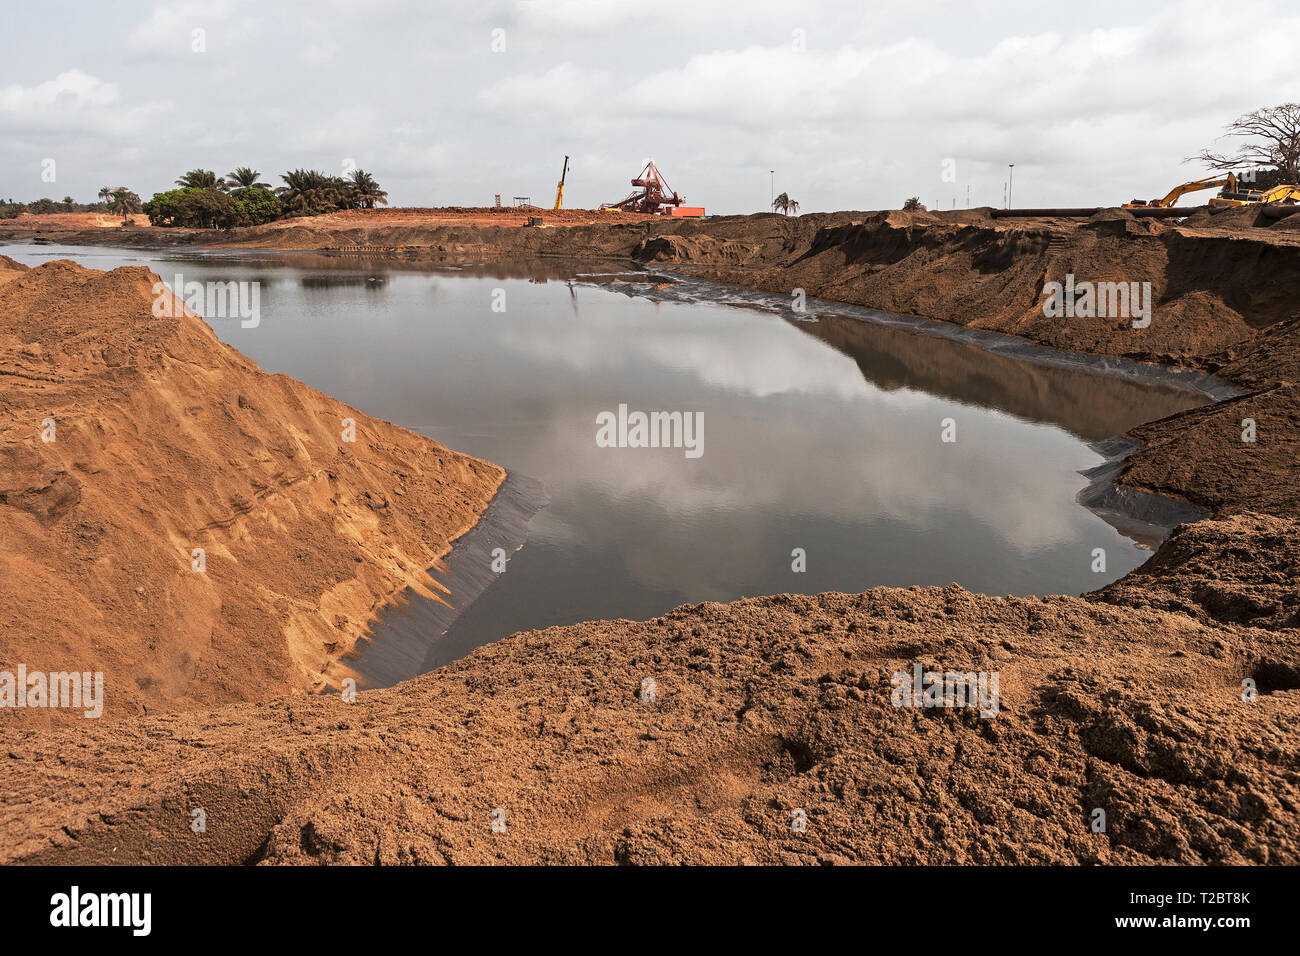 Port operations for managing and transporting iron ore. Future site extension with water area being reclaimed with sand from dredging sea channel Stock Photo